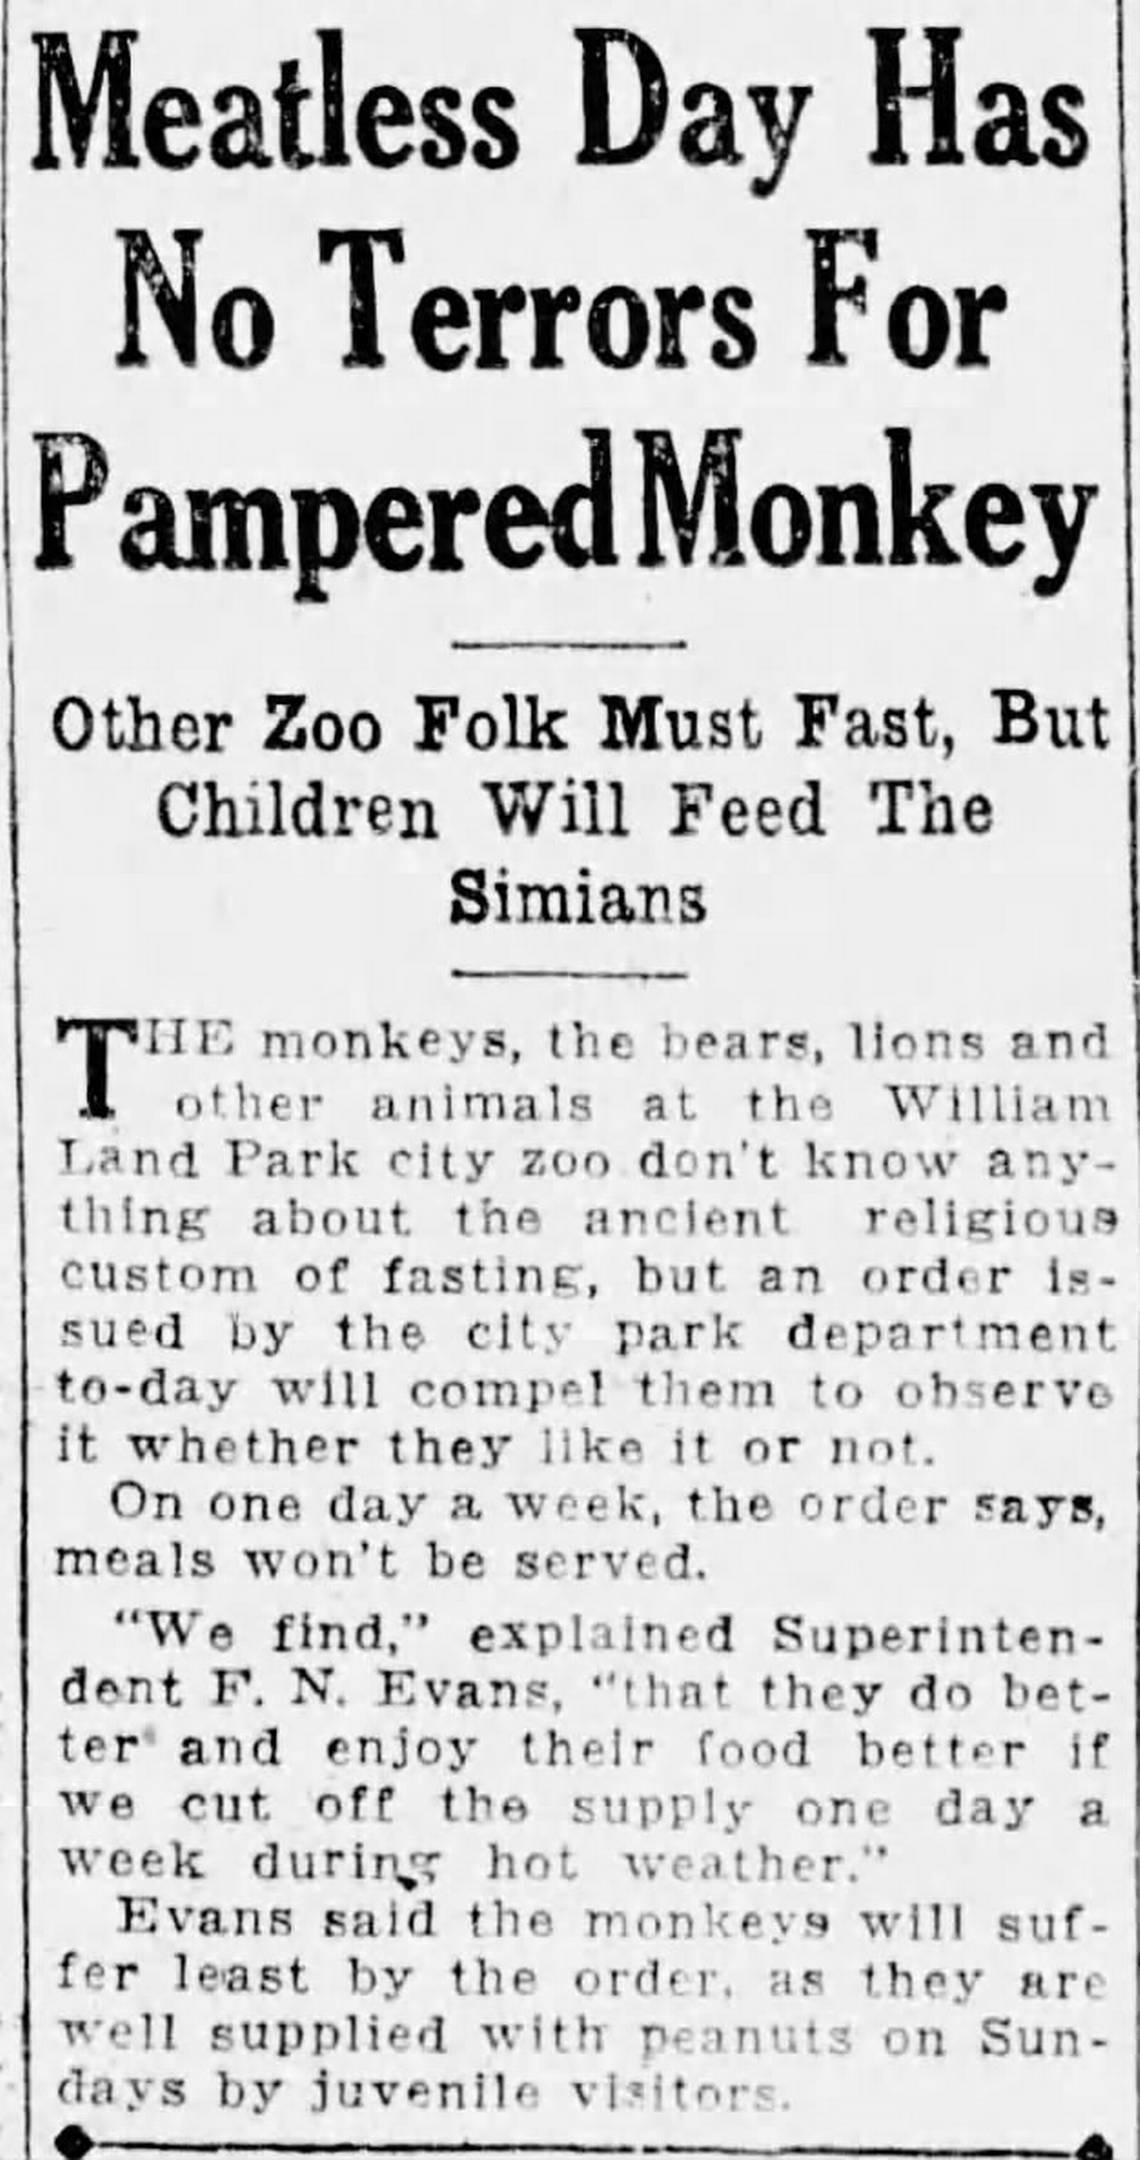 A May 30, 1927, Bee article titled “Meatless Day Has No Terrors For Pampered Monkeys” announces a city ordinance for animals at Land Park Zoo to fast one day per week.